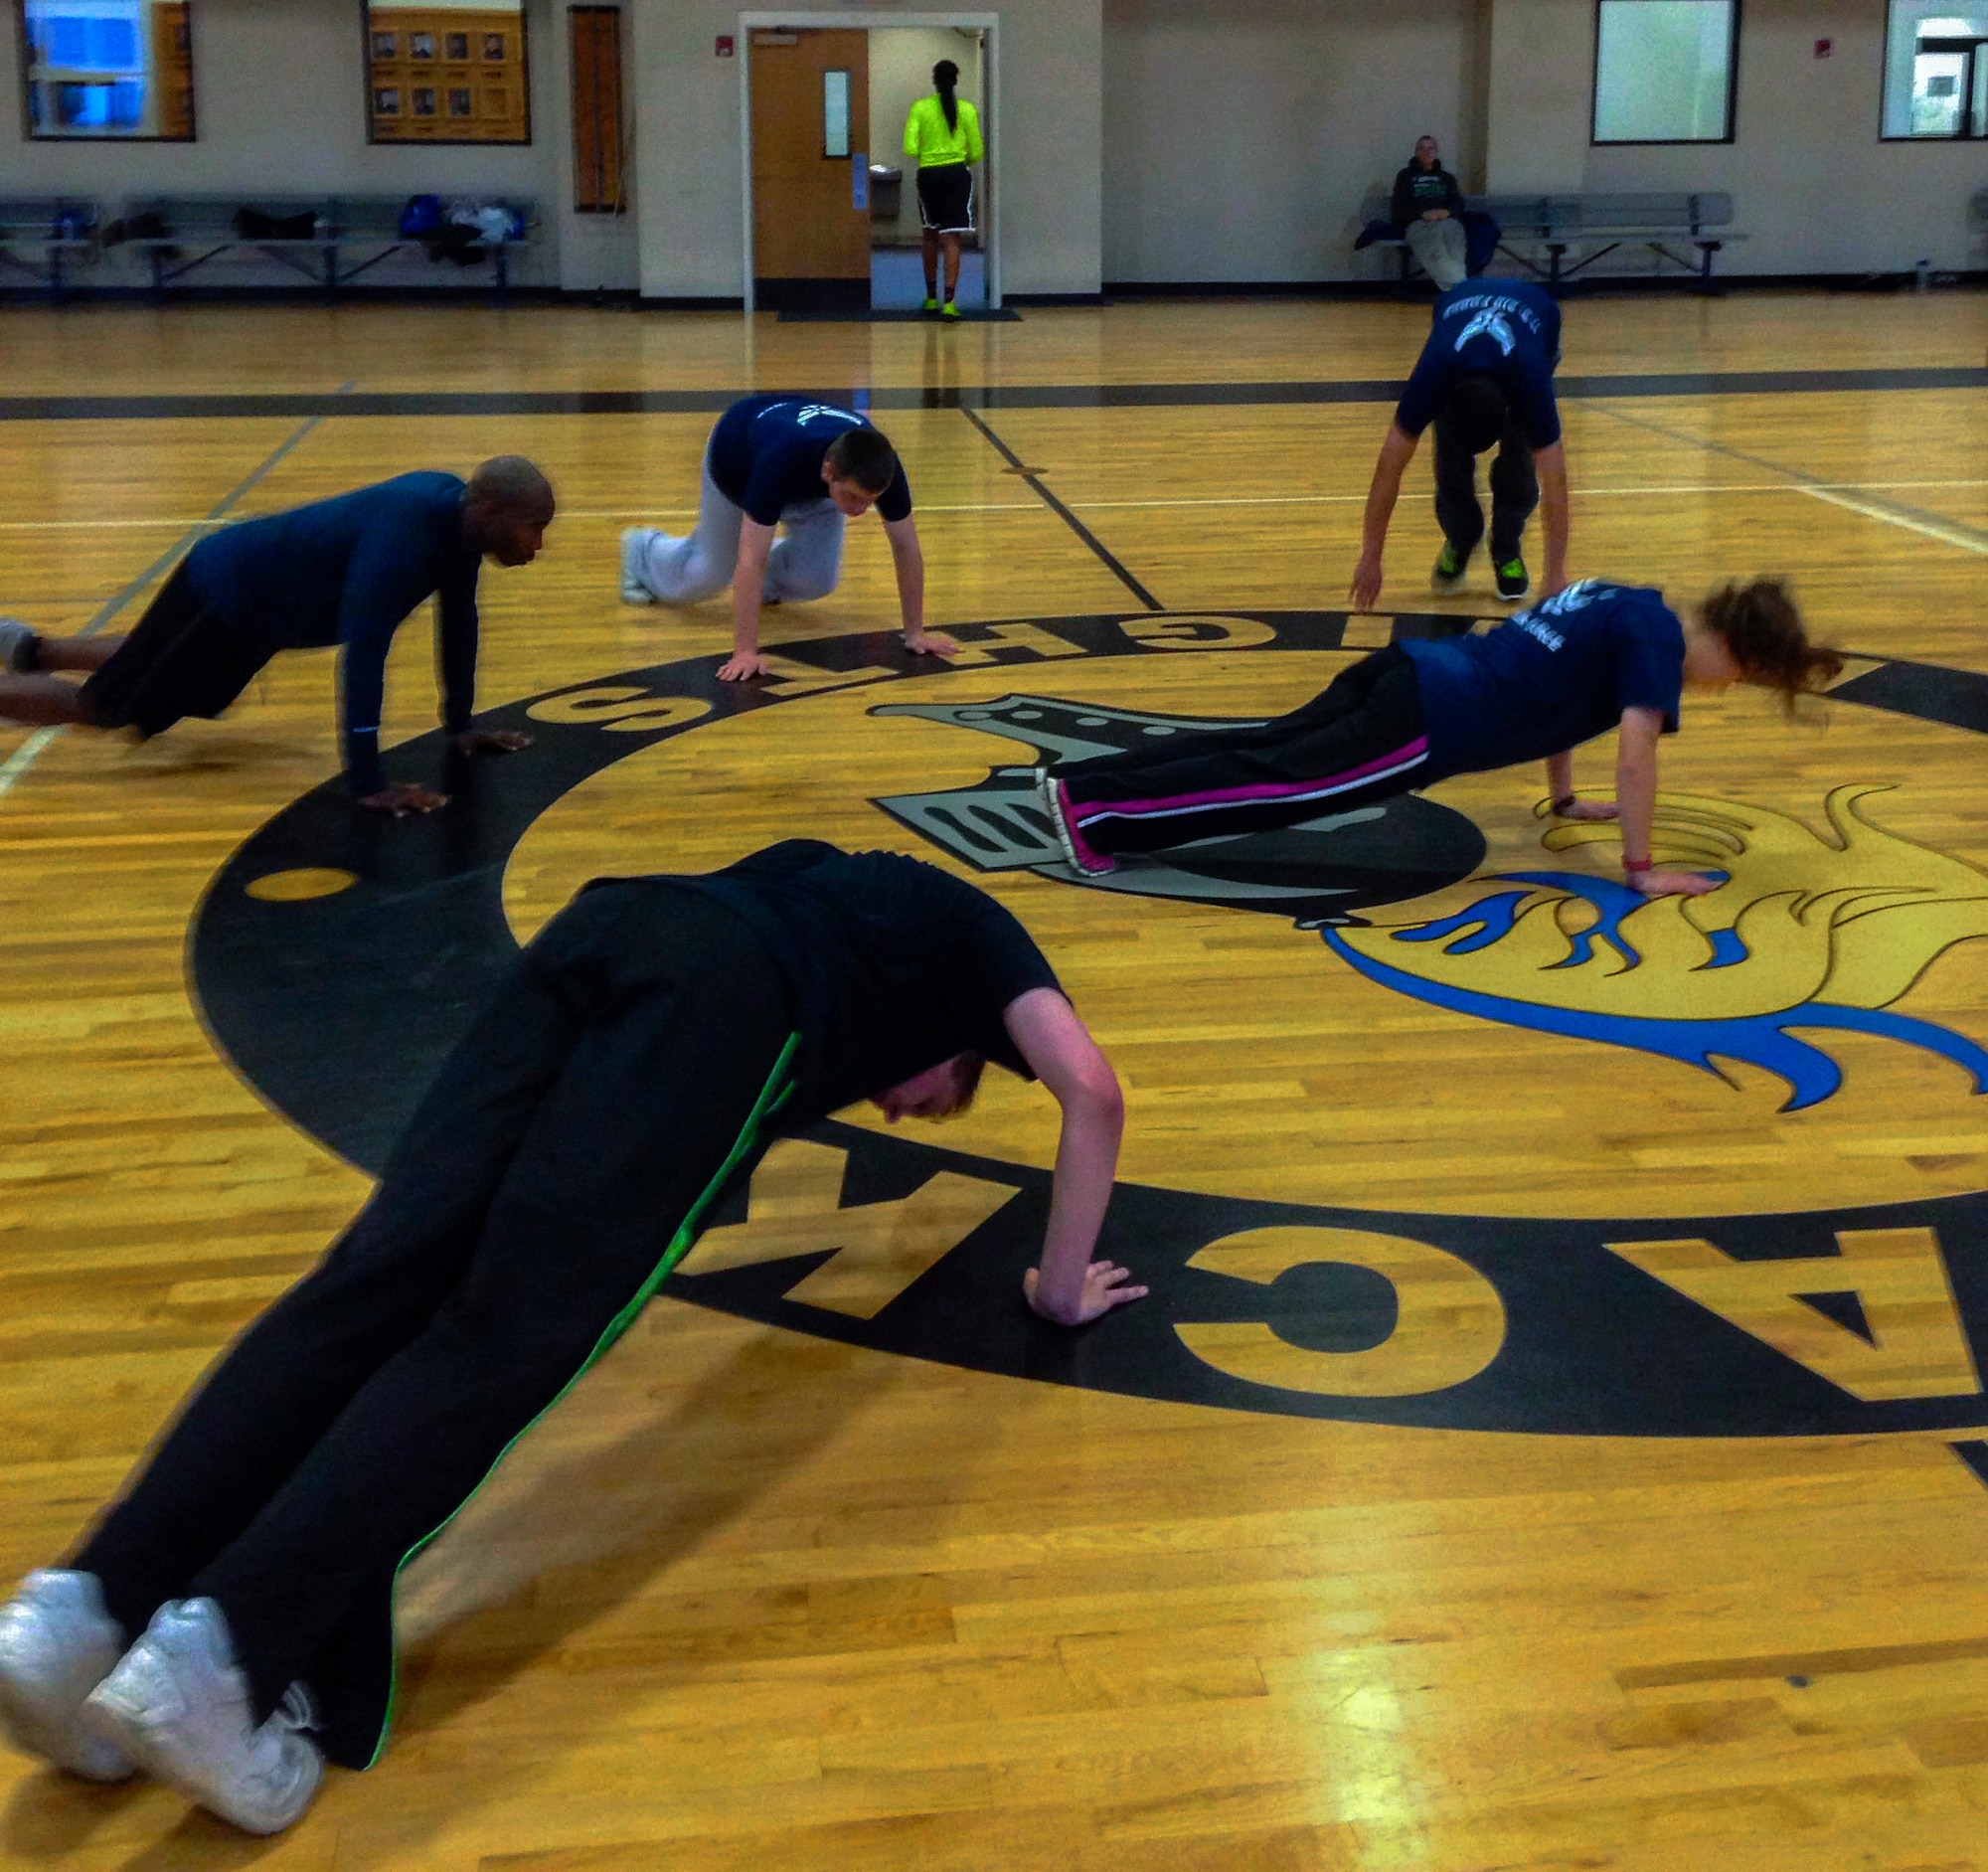 Air Force recruits in the delayed entry program do push-ups to prepare themselves for basic training March 27, 2014, at Little Rock Air Force Base, Ark. Along with working out, the recruits in the DEP learn facing movements, enlisted and officer ranks, reporting statements and Air Force core values. (Courtesy photo)